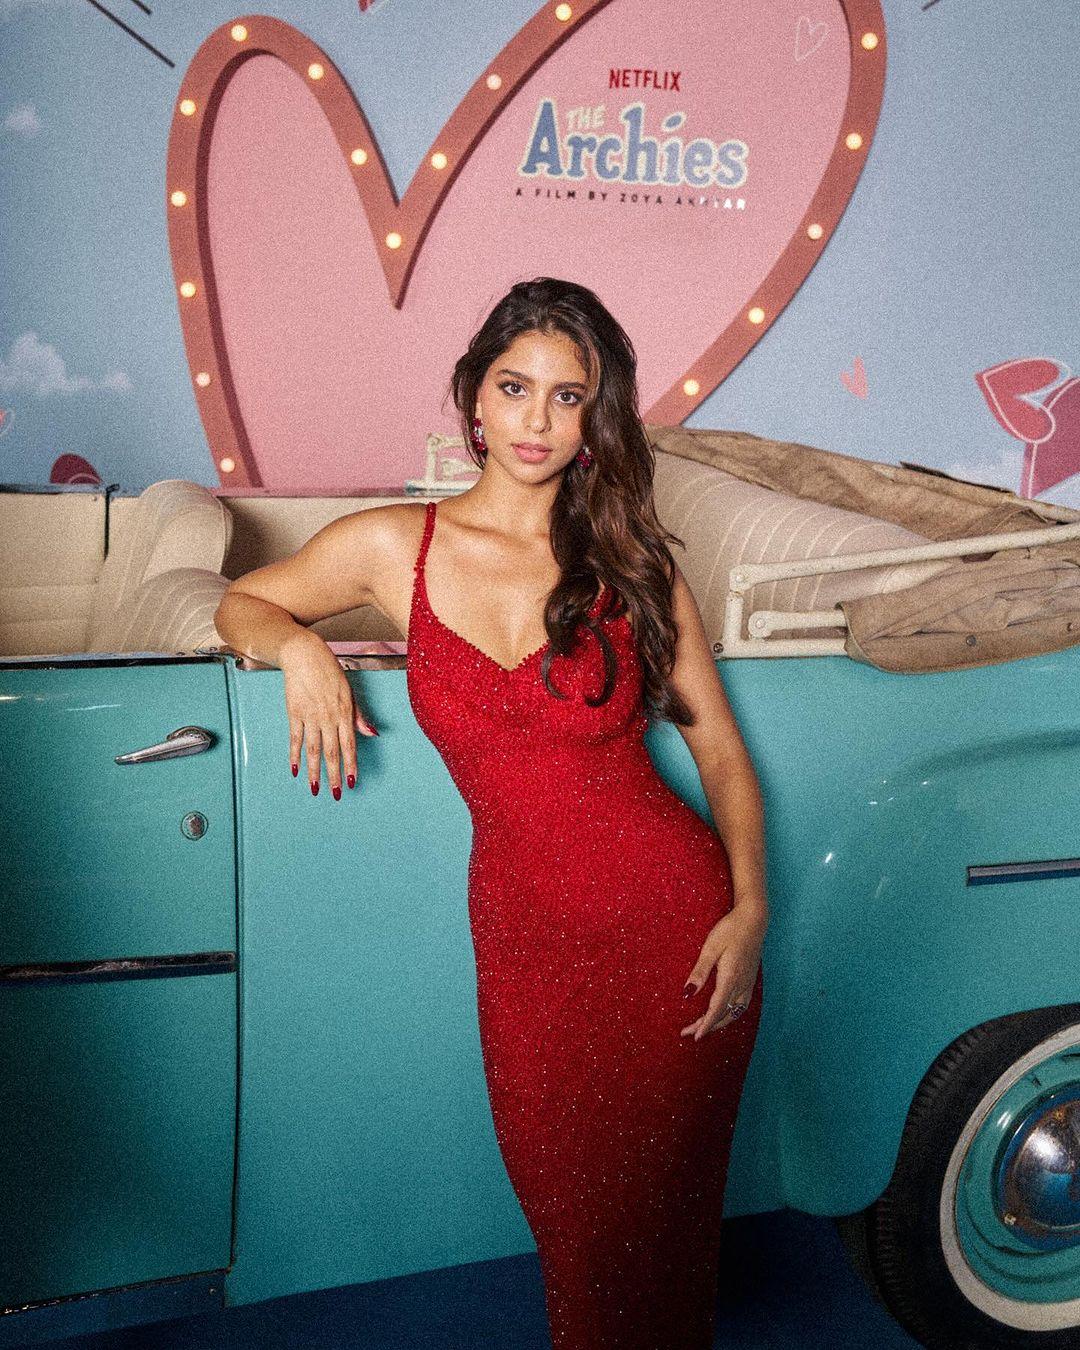 Suhana Khan, please take a bow. This red dress was what dreams are made of. We are in awe of the embellishments, the hair, and the way it perfectly brought out Veronica Lodge!